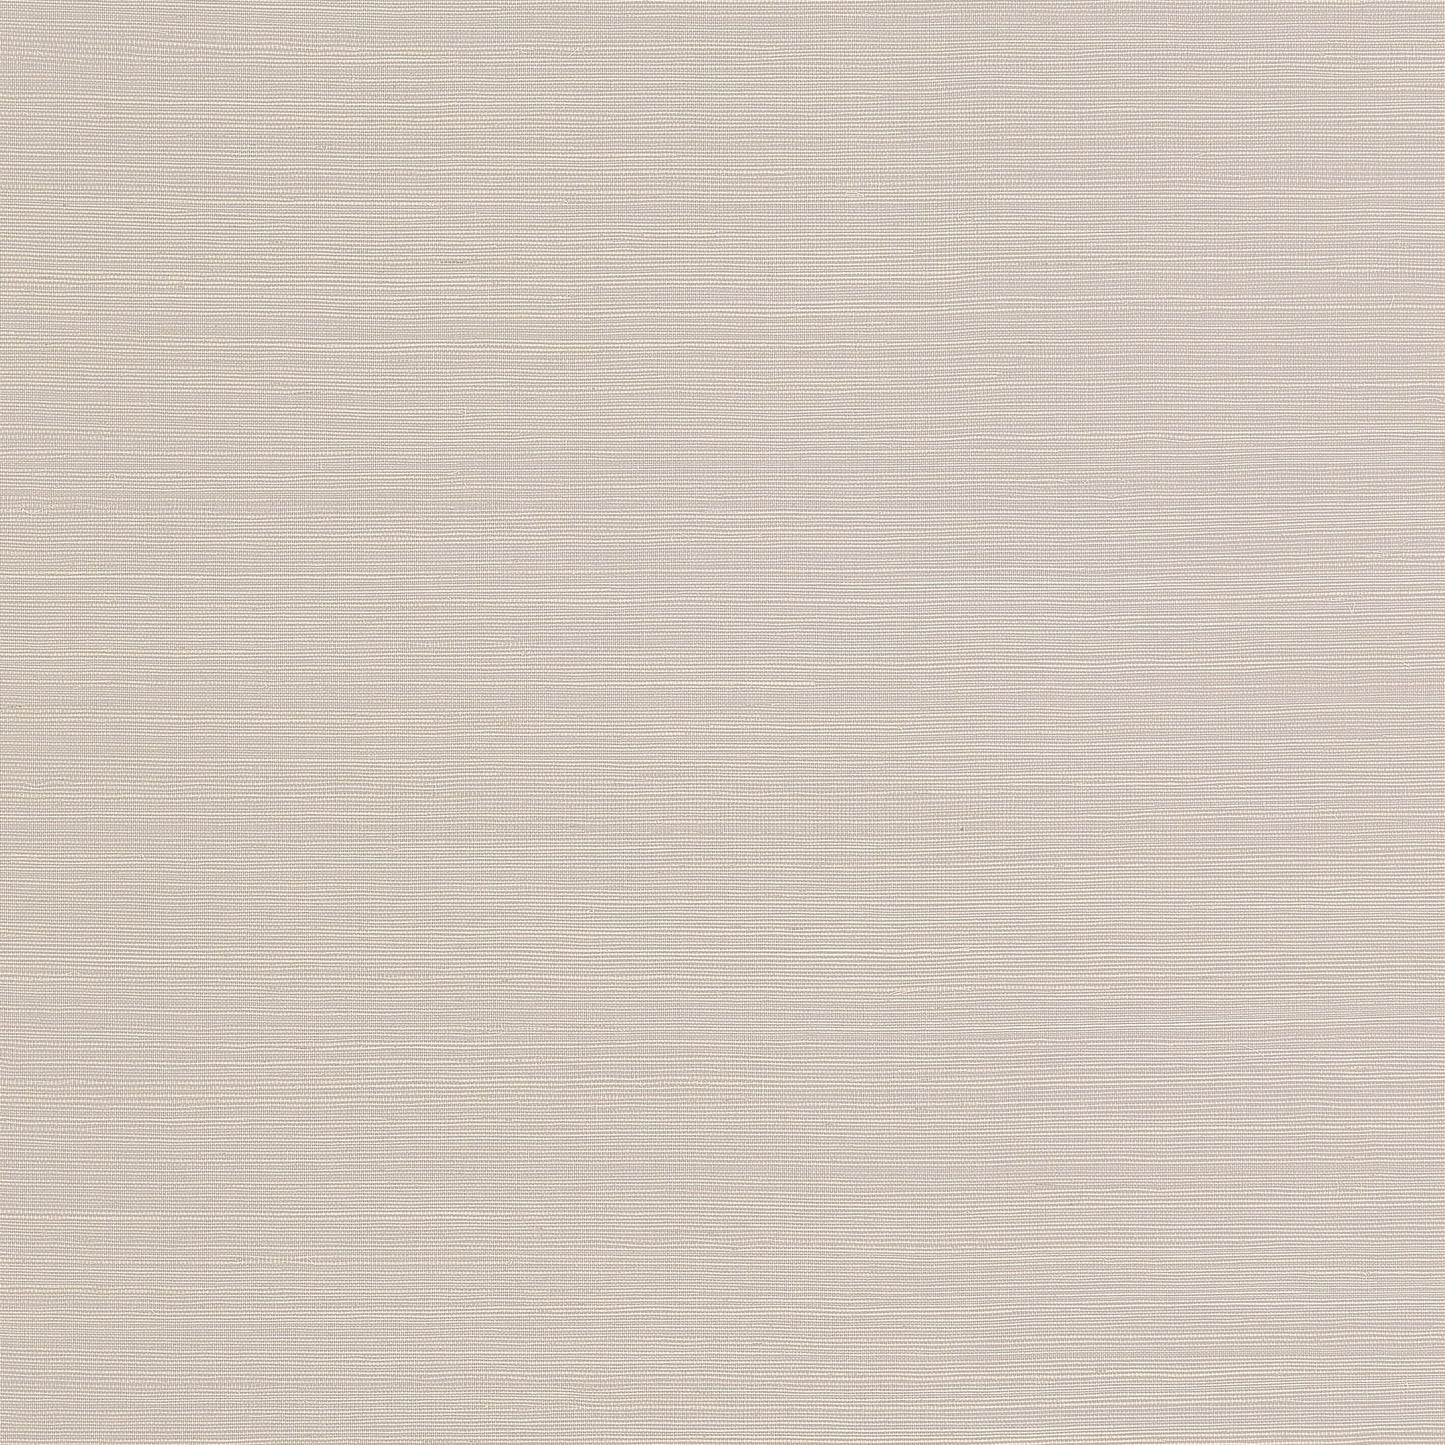 Purchase Thibaut Wallpaper Product# T19645 pattern name Heather Sisal color Tan. 